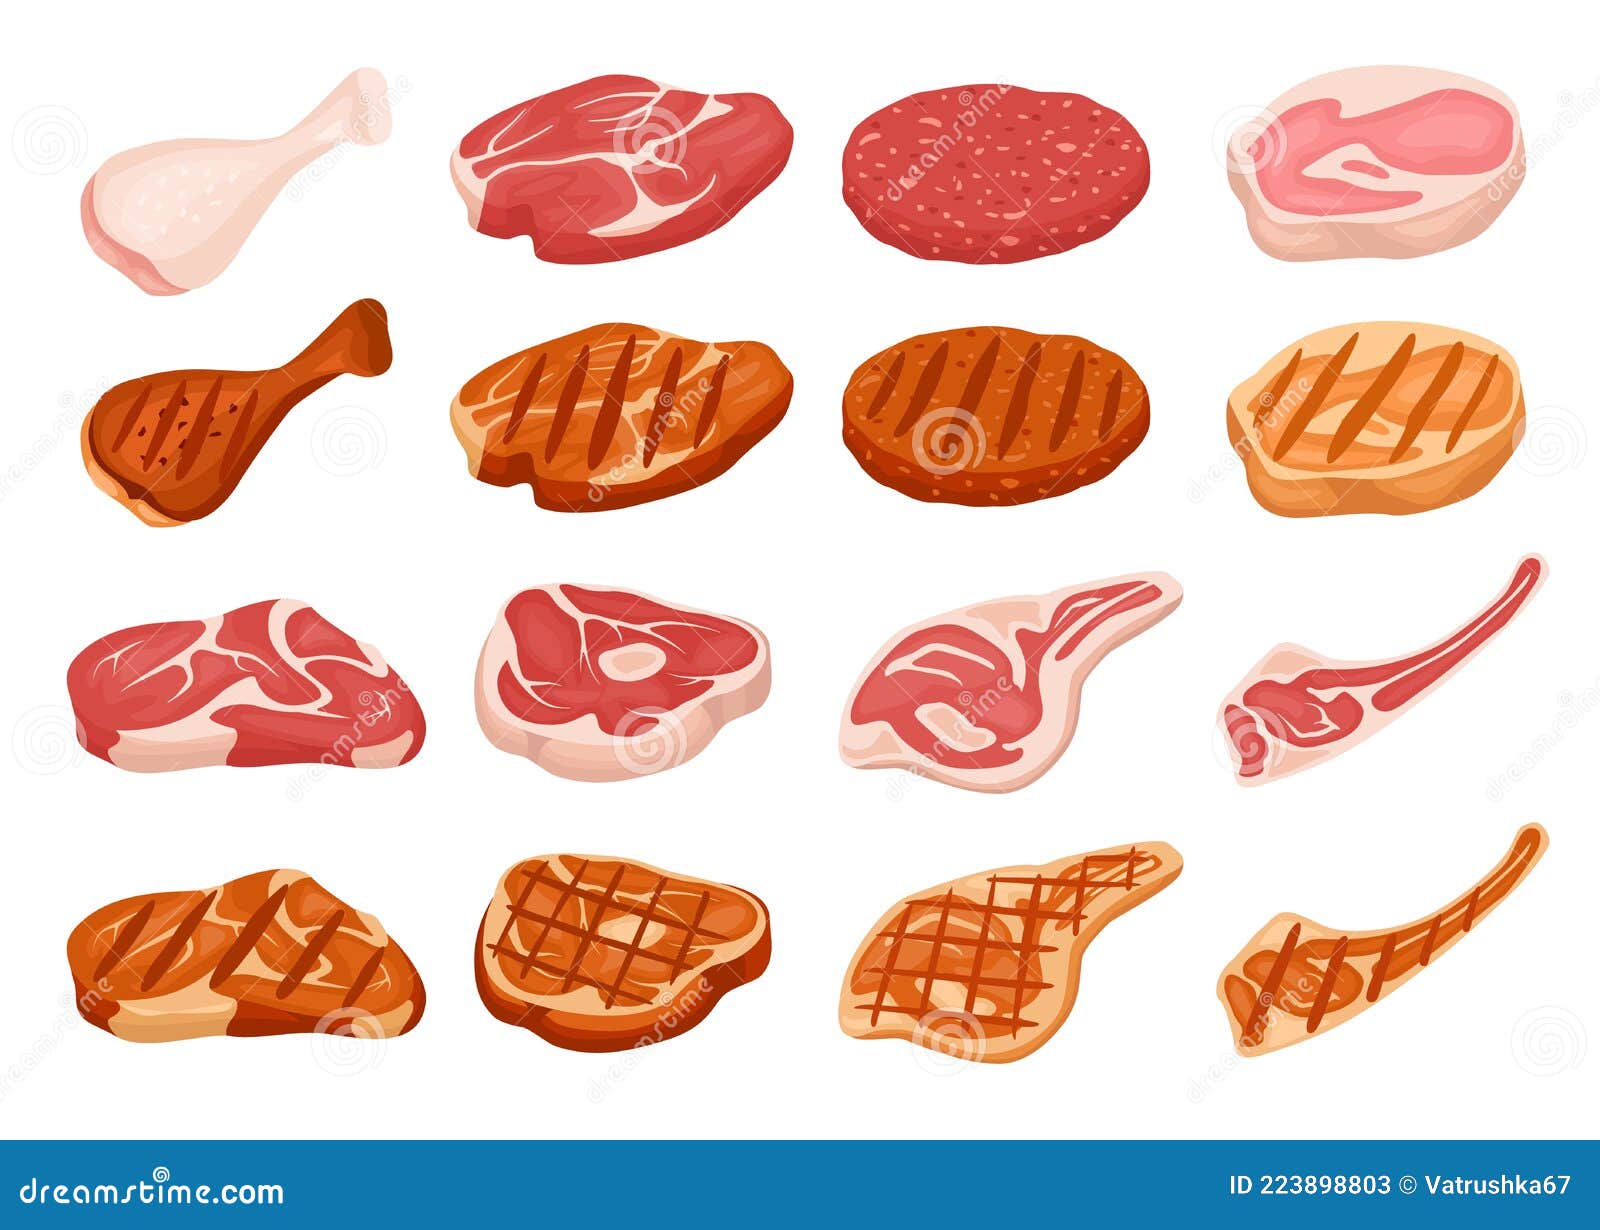 Fresh and Grilled Meat. Cartoon Fried Steak with Marks. Chicken, Pork, Beef, Burger Patty Vector Illustration of shop, cook: 223898803